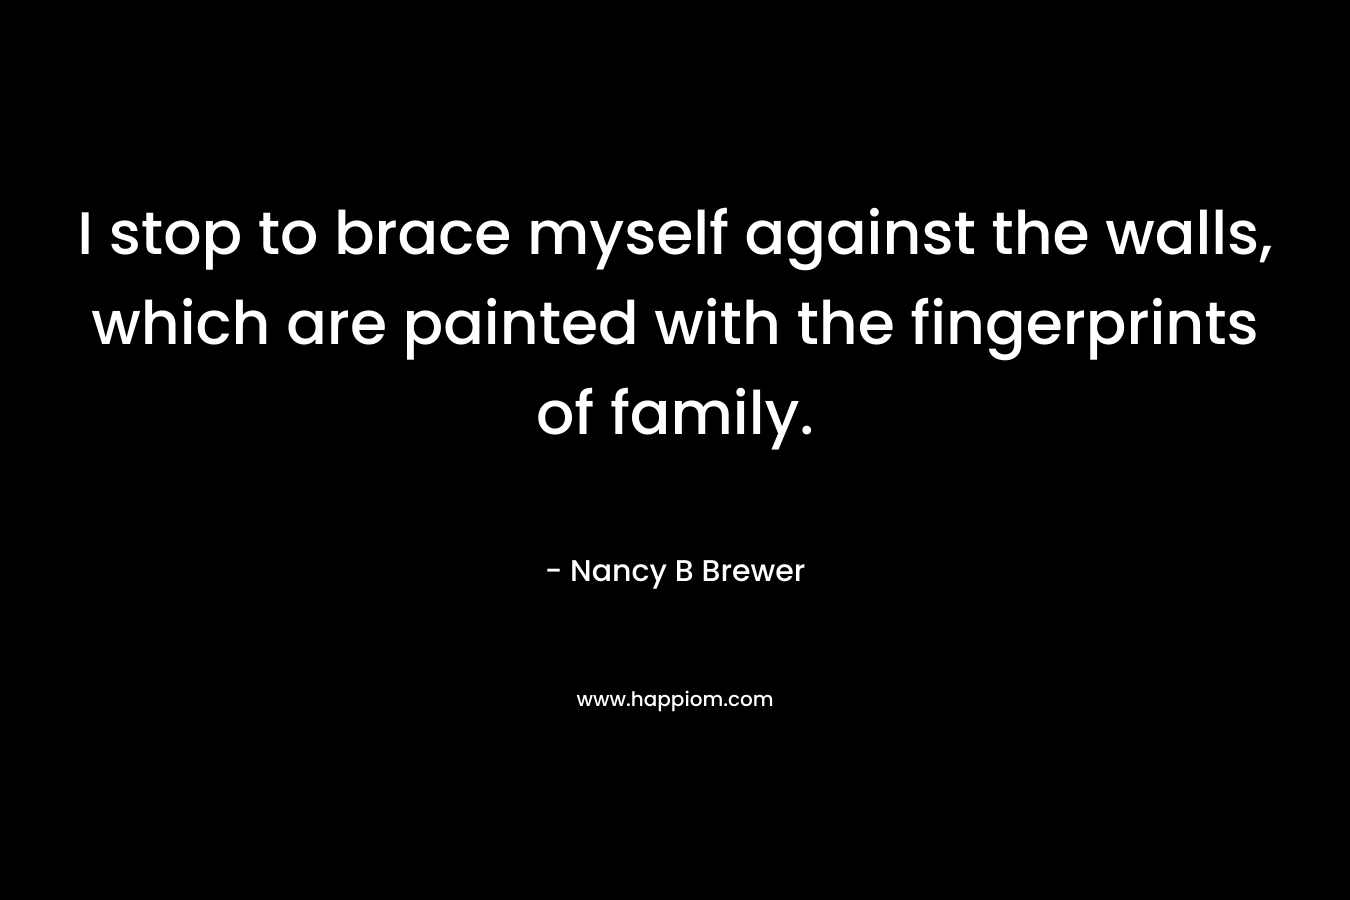 I stop to brace myself against the walls, which are painted with the fingerprints of family. – Nancy B Brewer